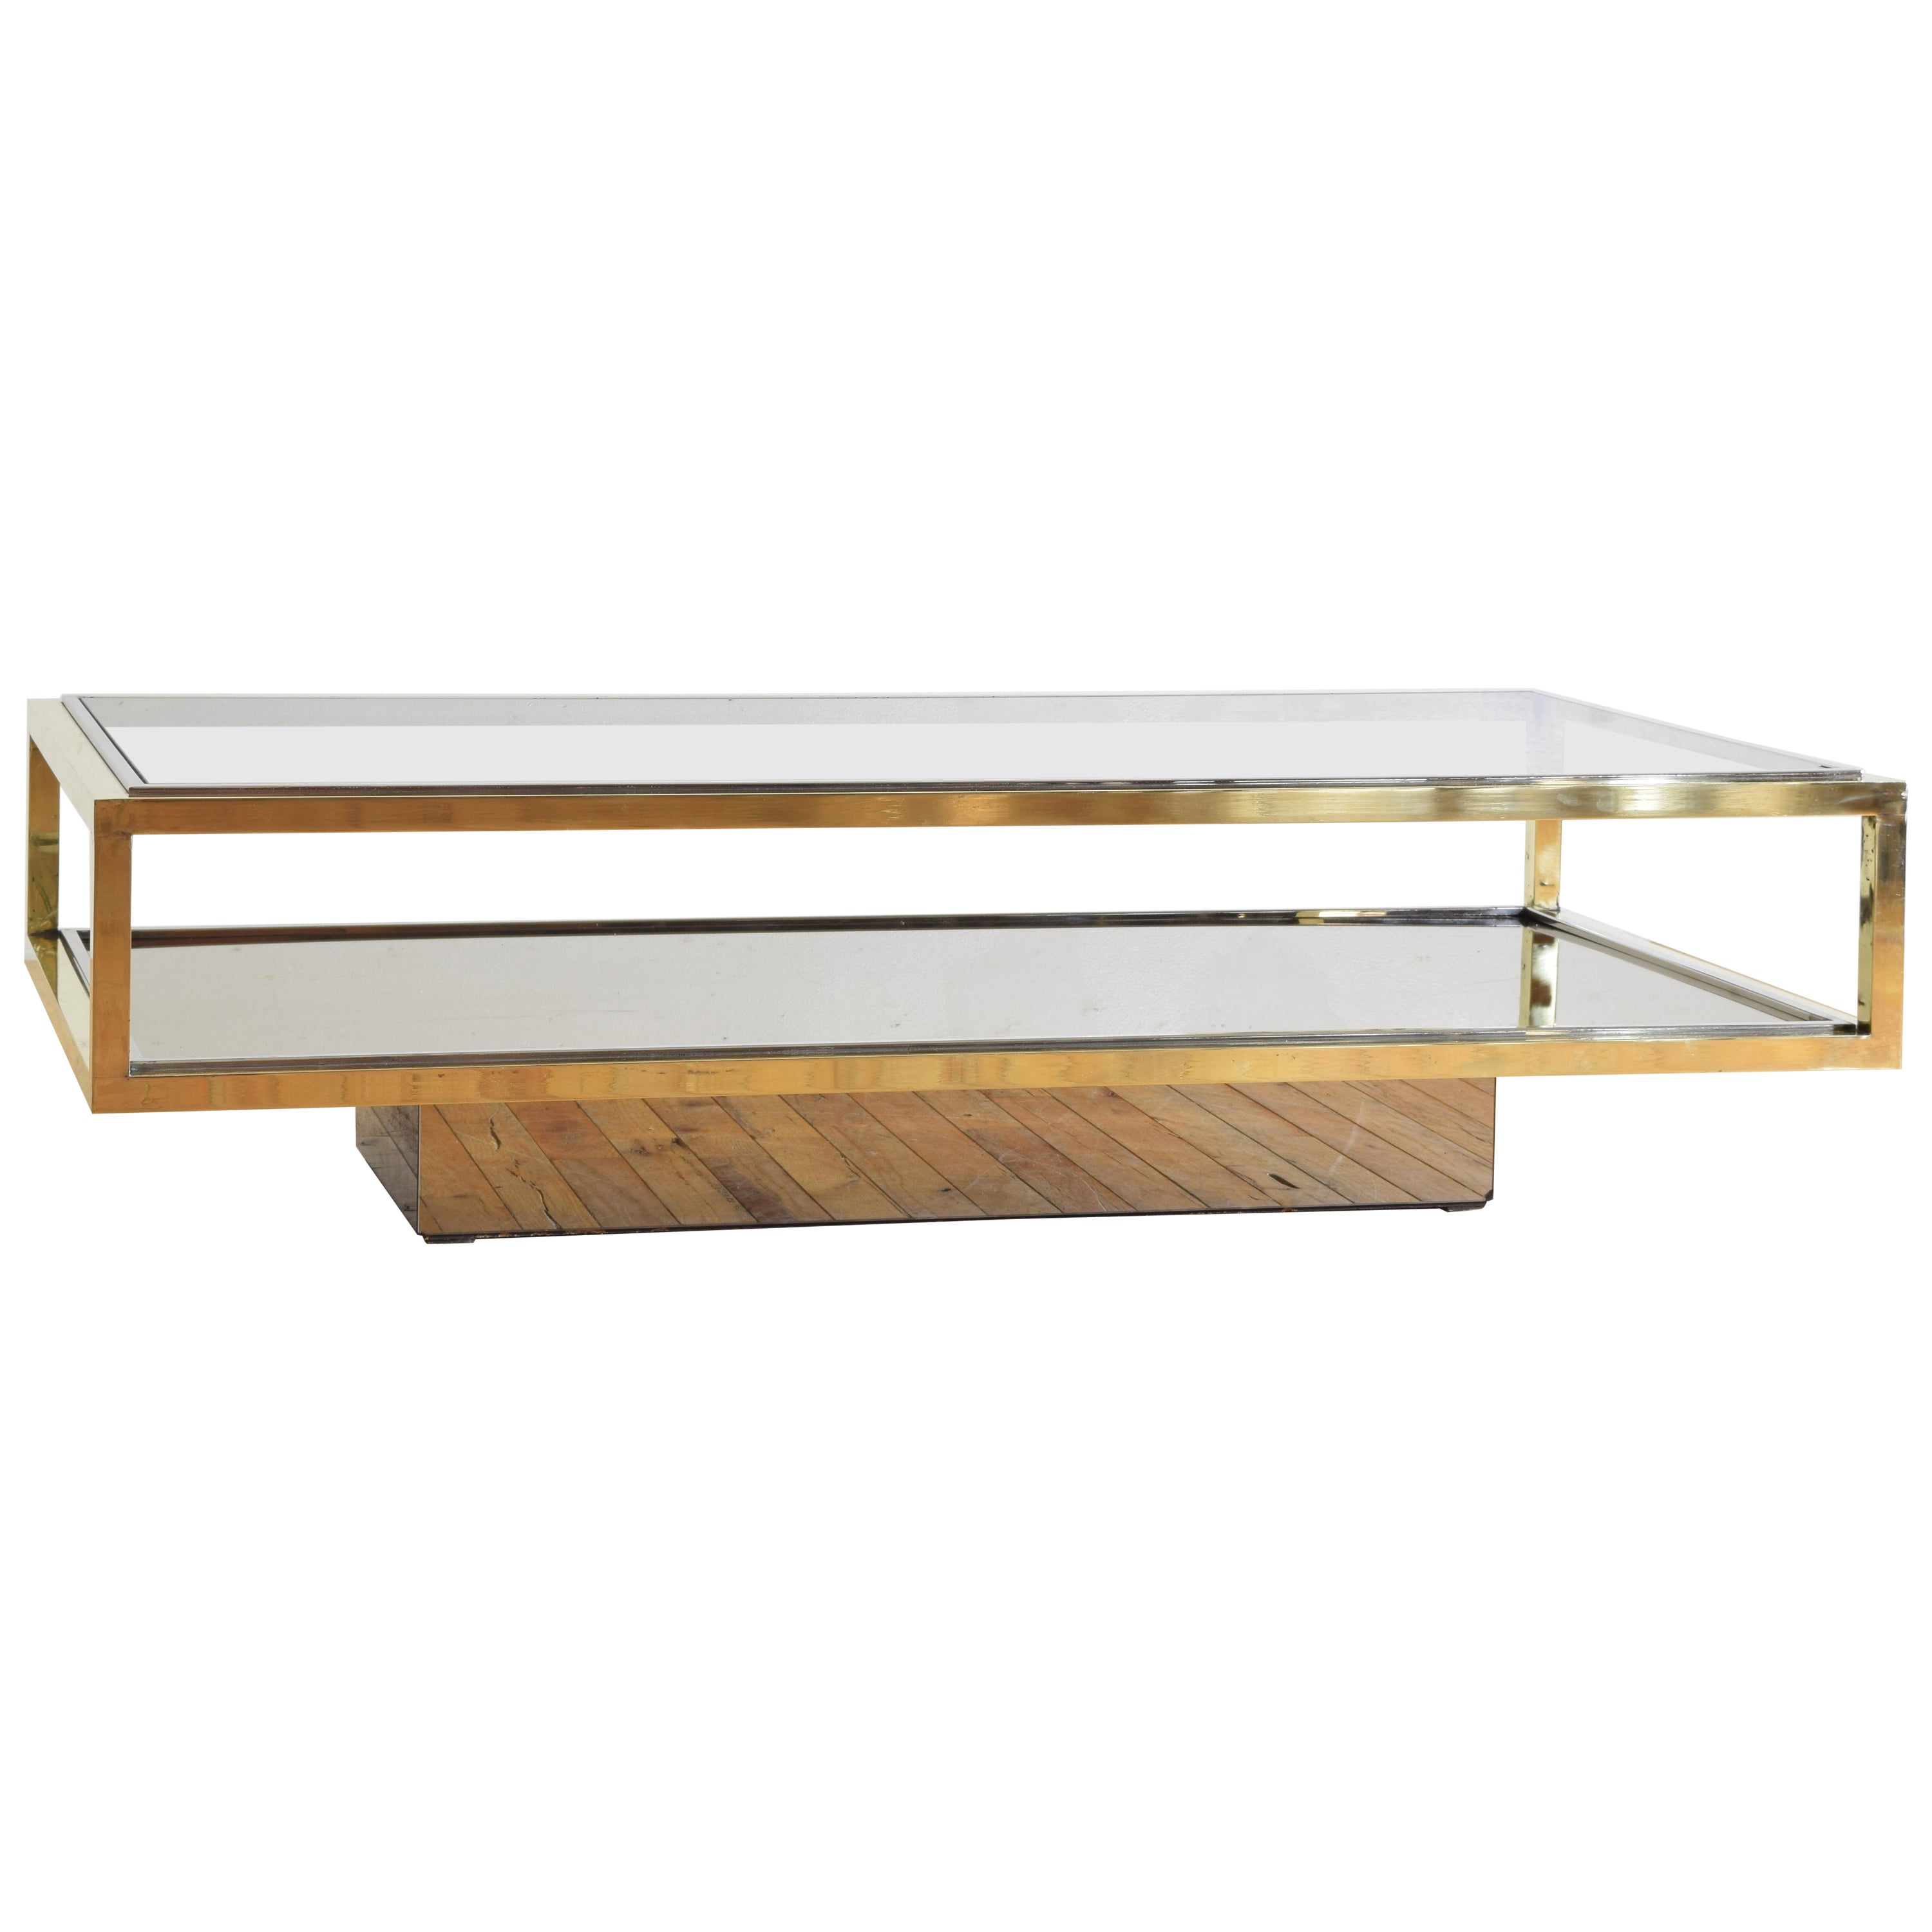 Italian Brass, Chrome, Mirrored, & Glass Coffee Table, likely 1970’s For Sale